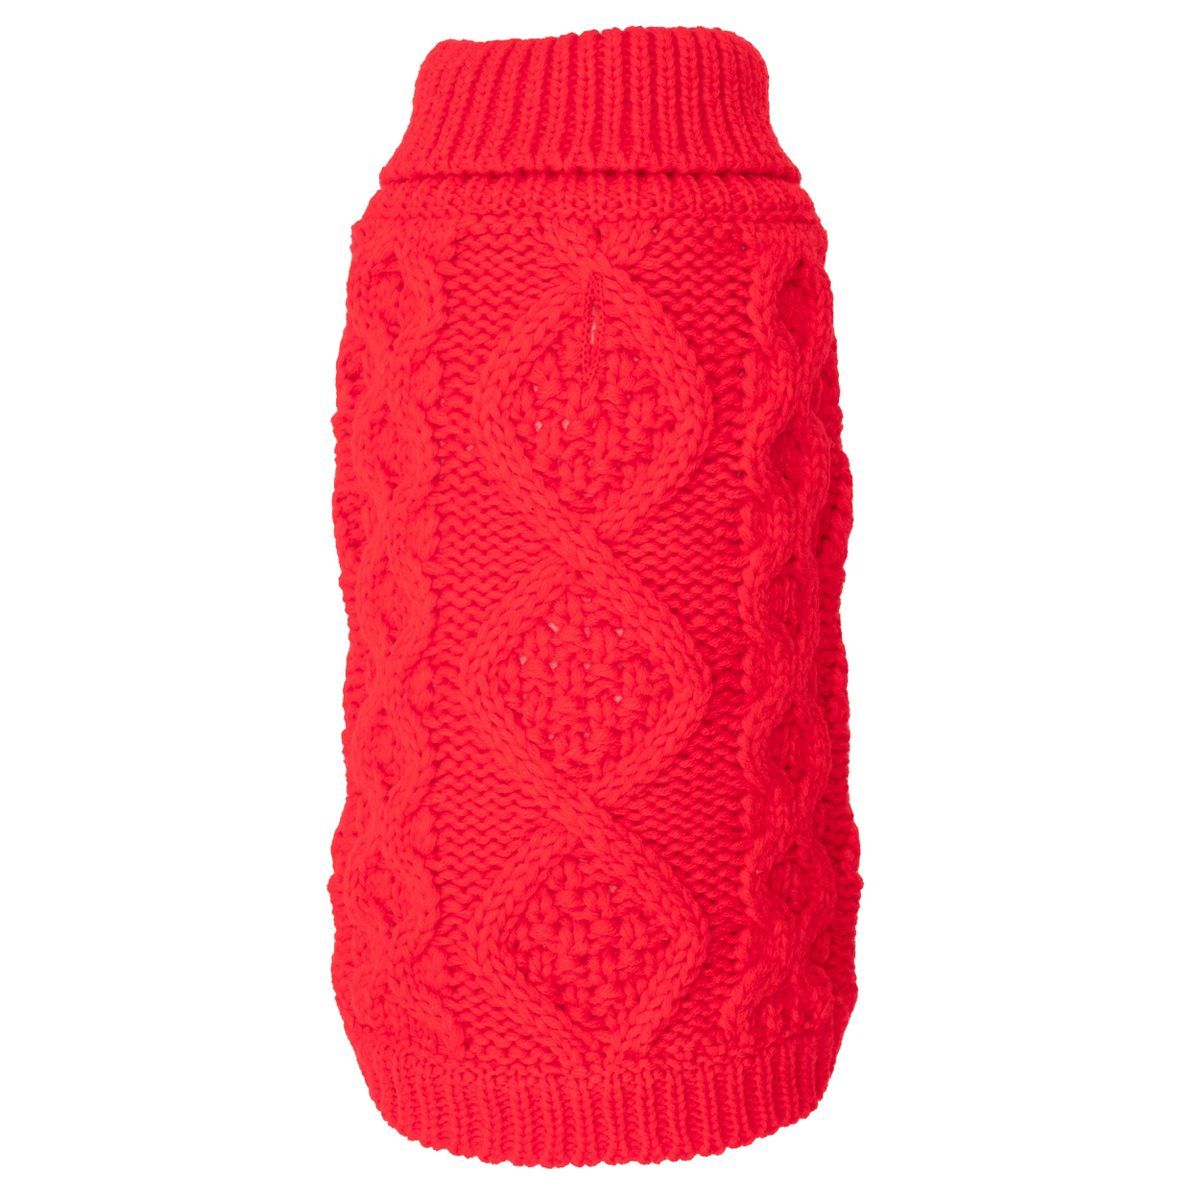 The Worthy Dog Chunky Knit Turtleneck Pullover Sweater | Target